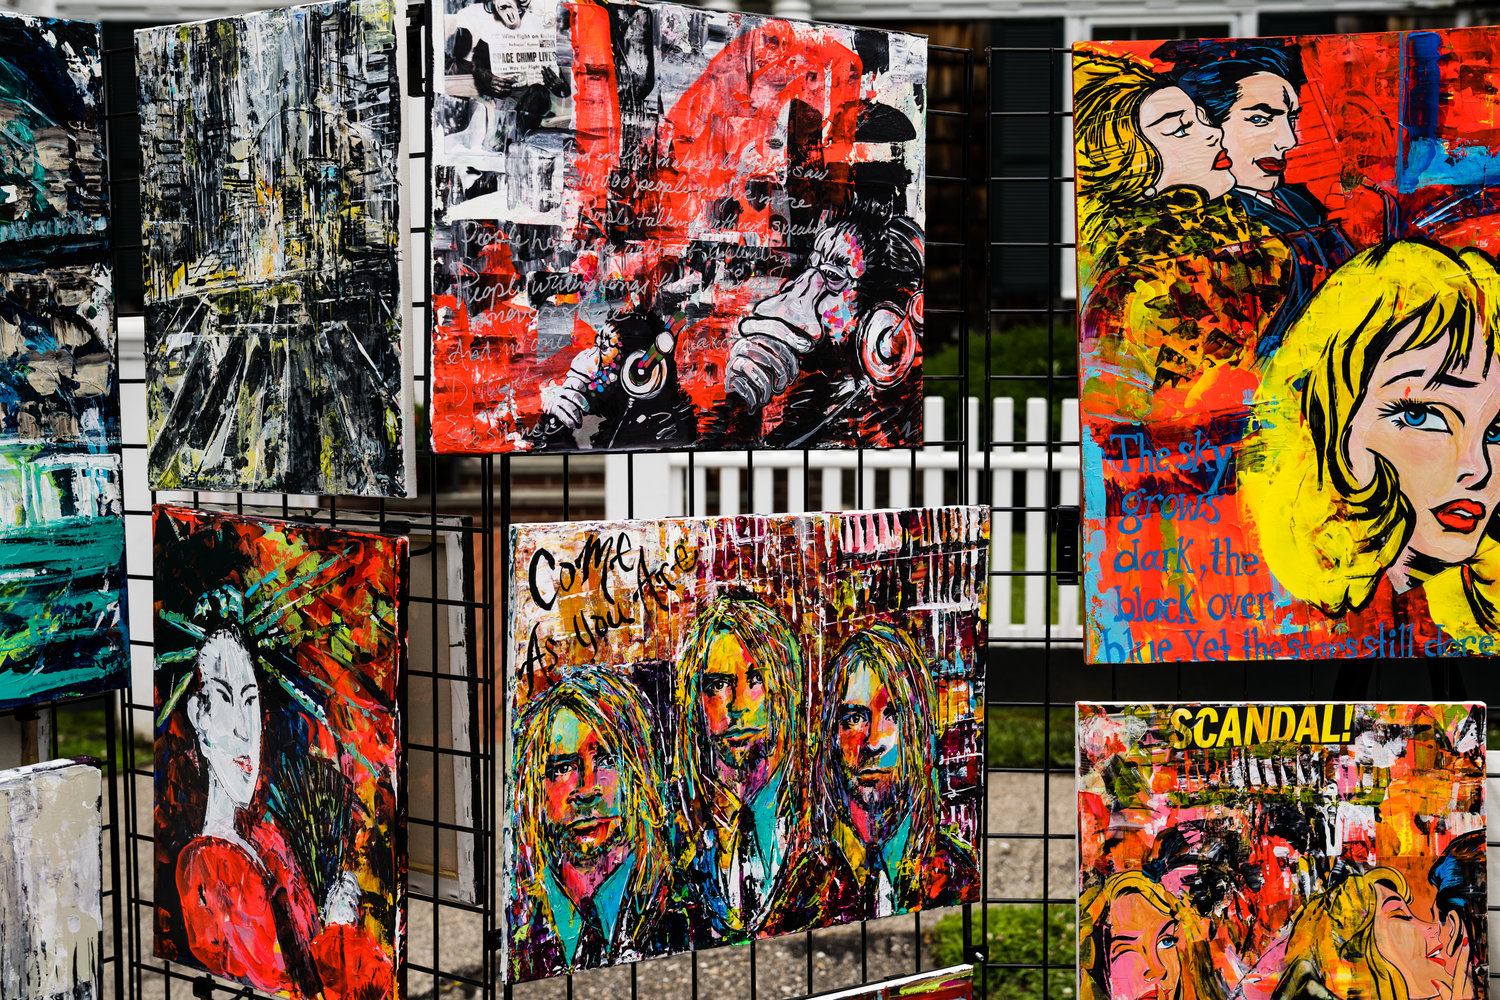 Jen Gilroy’s graphic and pop influence stood out, with bold color schemes and ravaged landscapes setting the scene for larger-than-life characters. In her faux triptych of Kurt Cobain, the voice of a generation’s expressions is slightly mottled in each rendition, capturing a turbulent frontman.